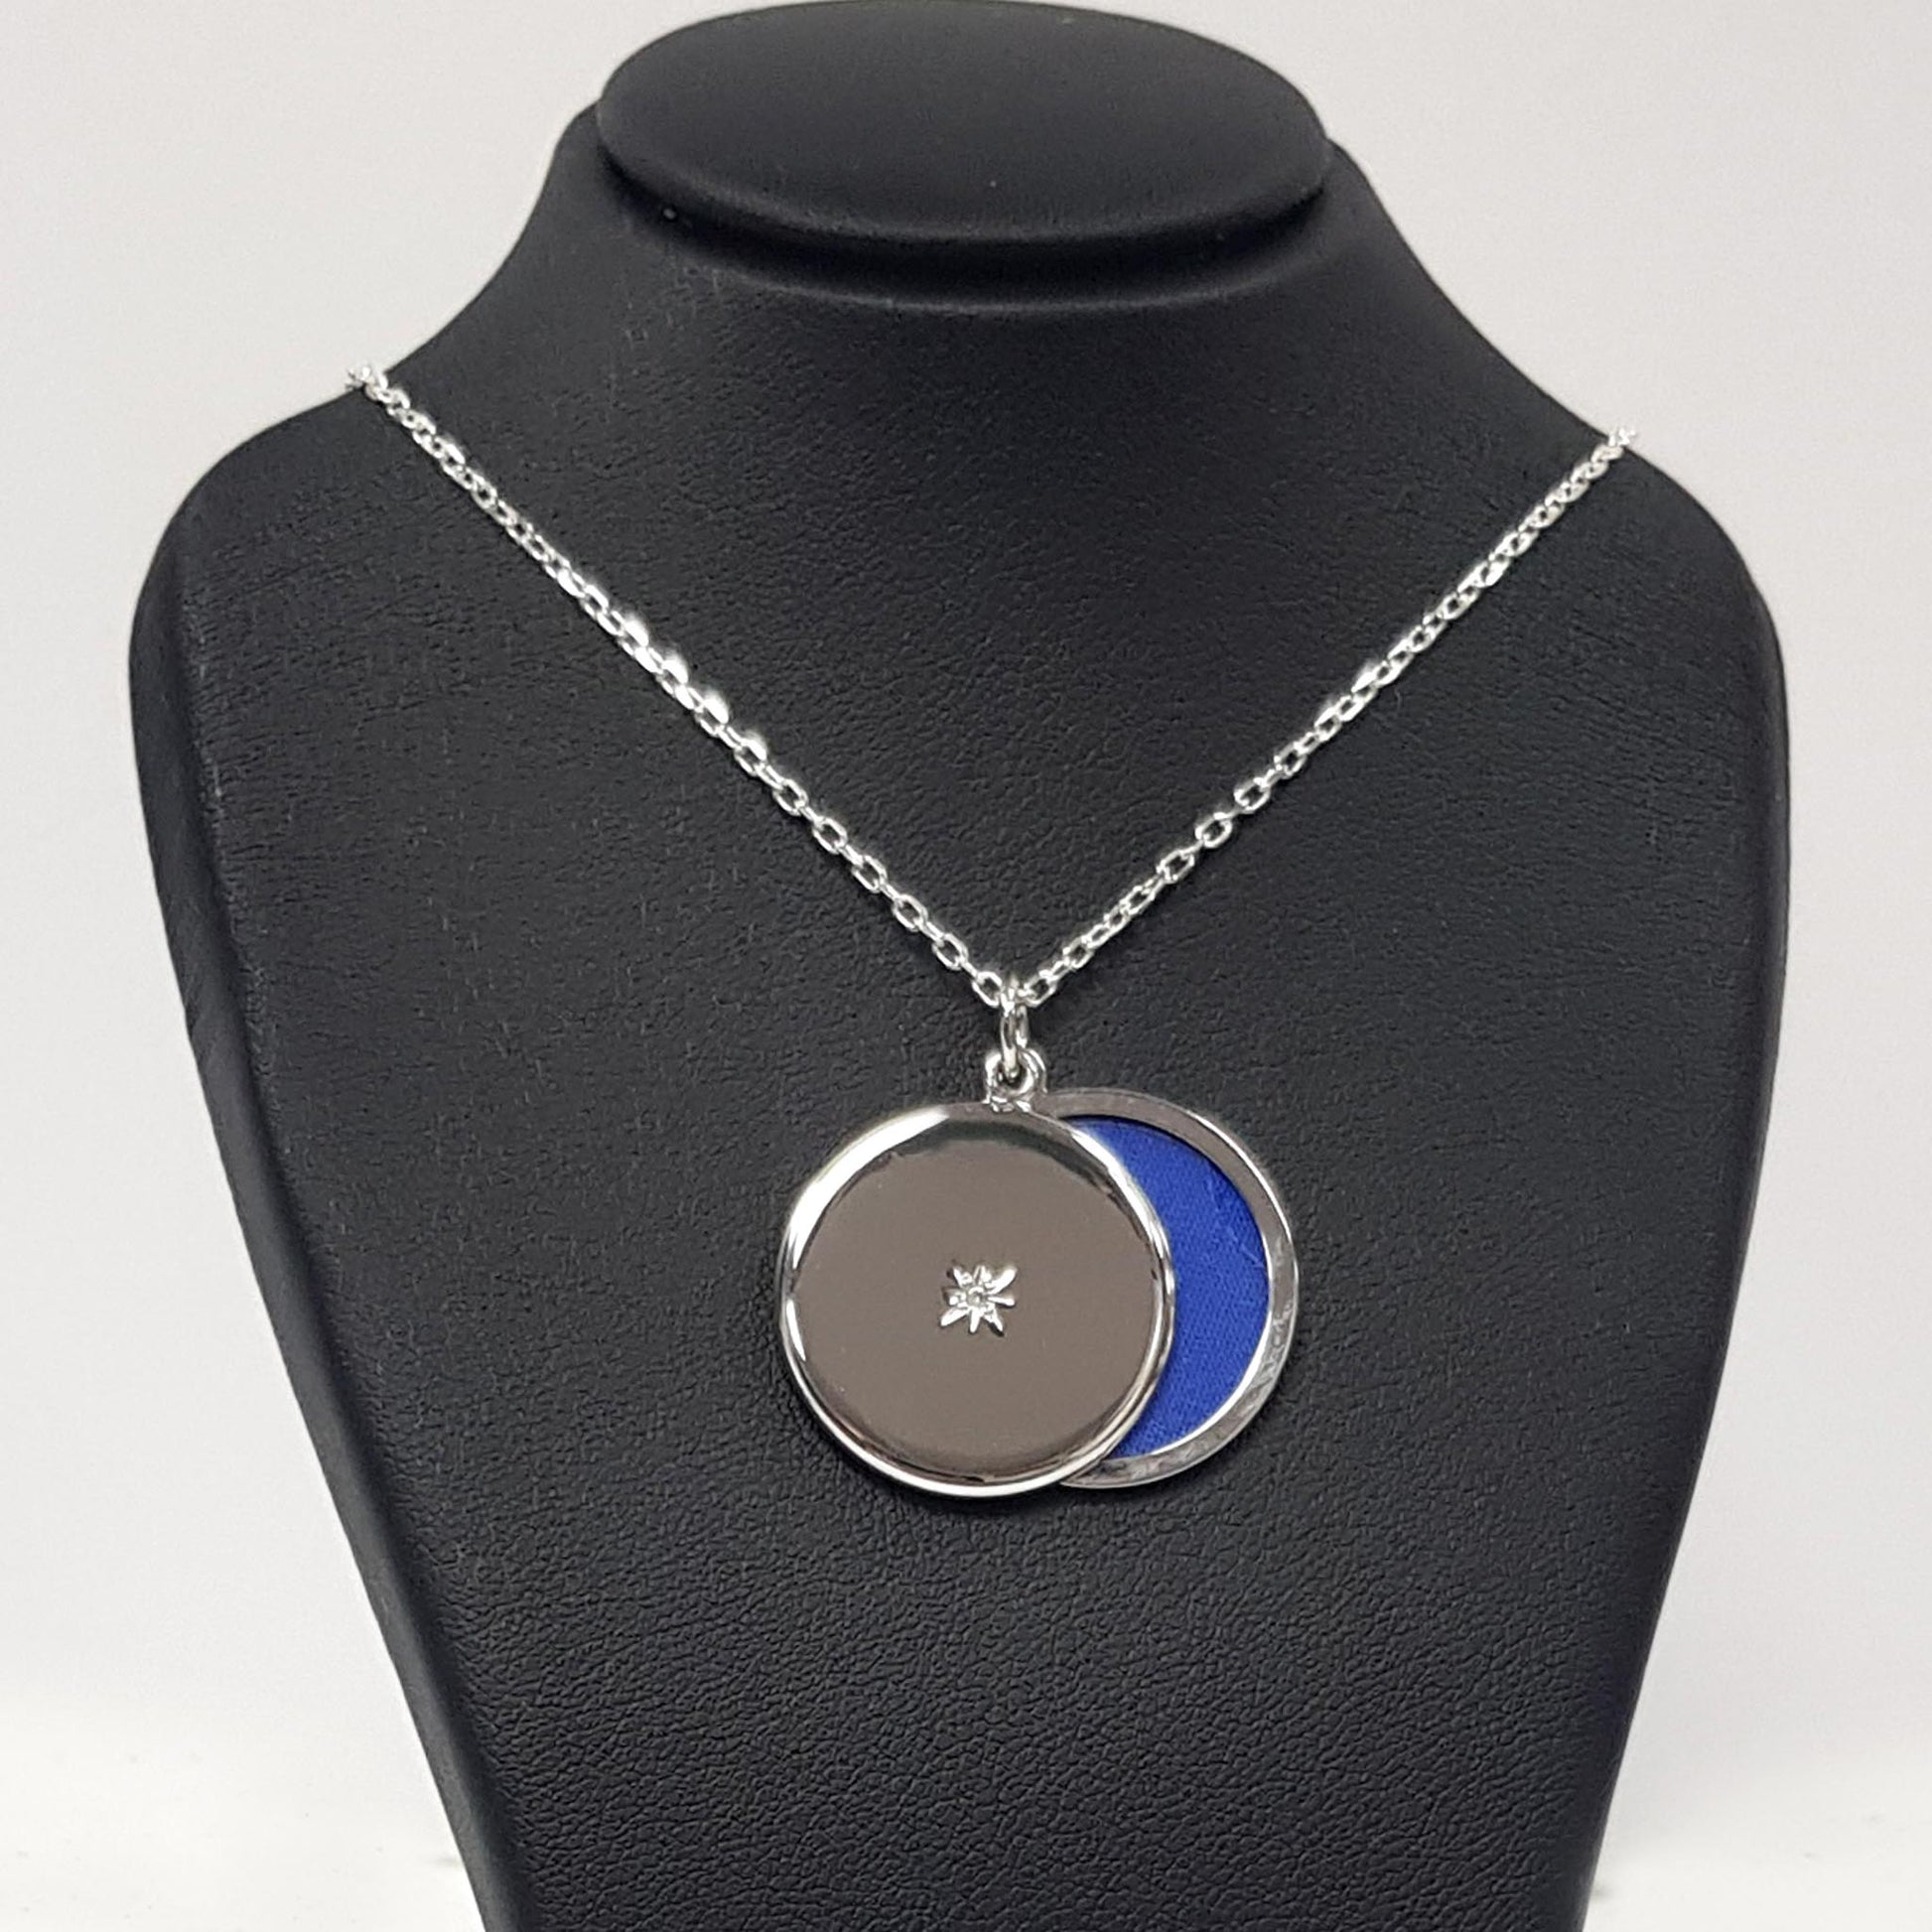 Round silver locket with cubic zirconia star in the centre photographed on a black bust